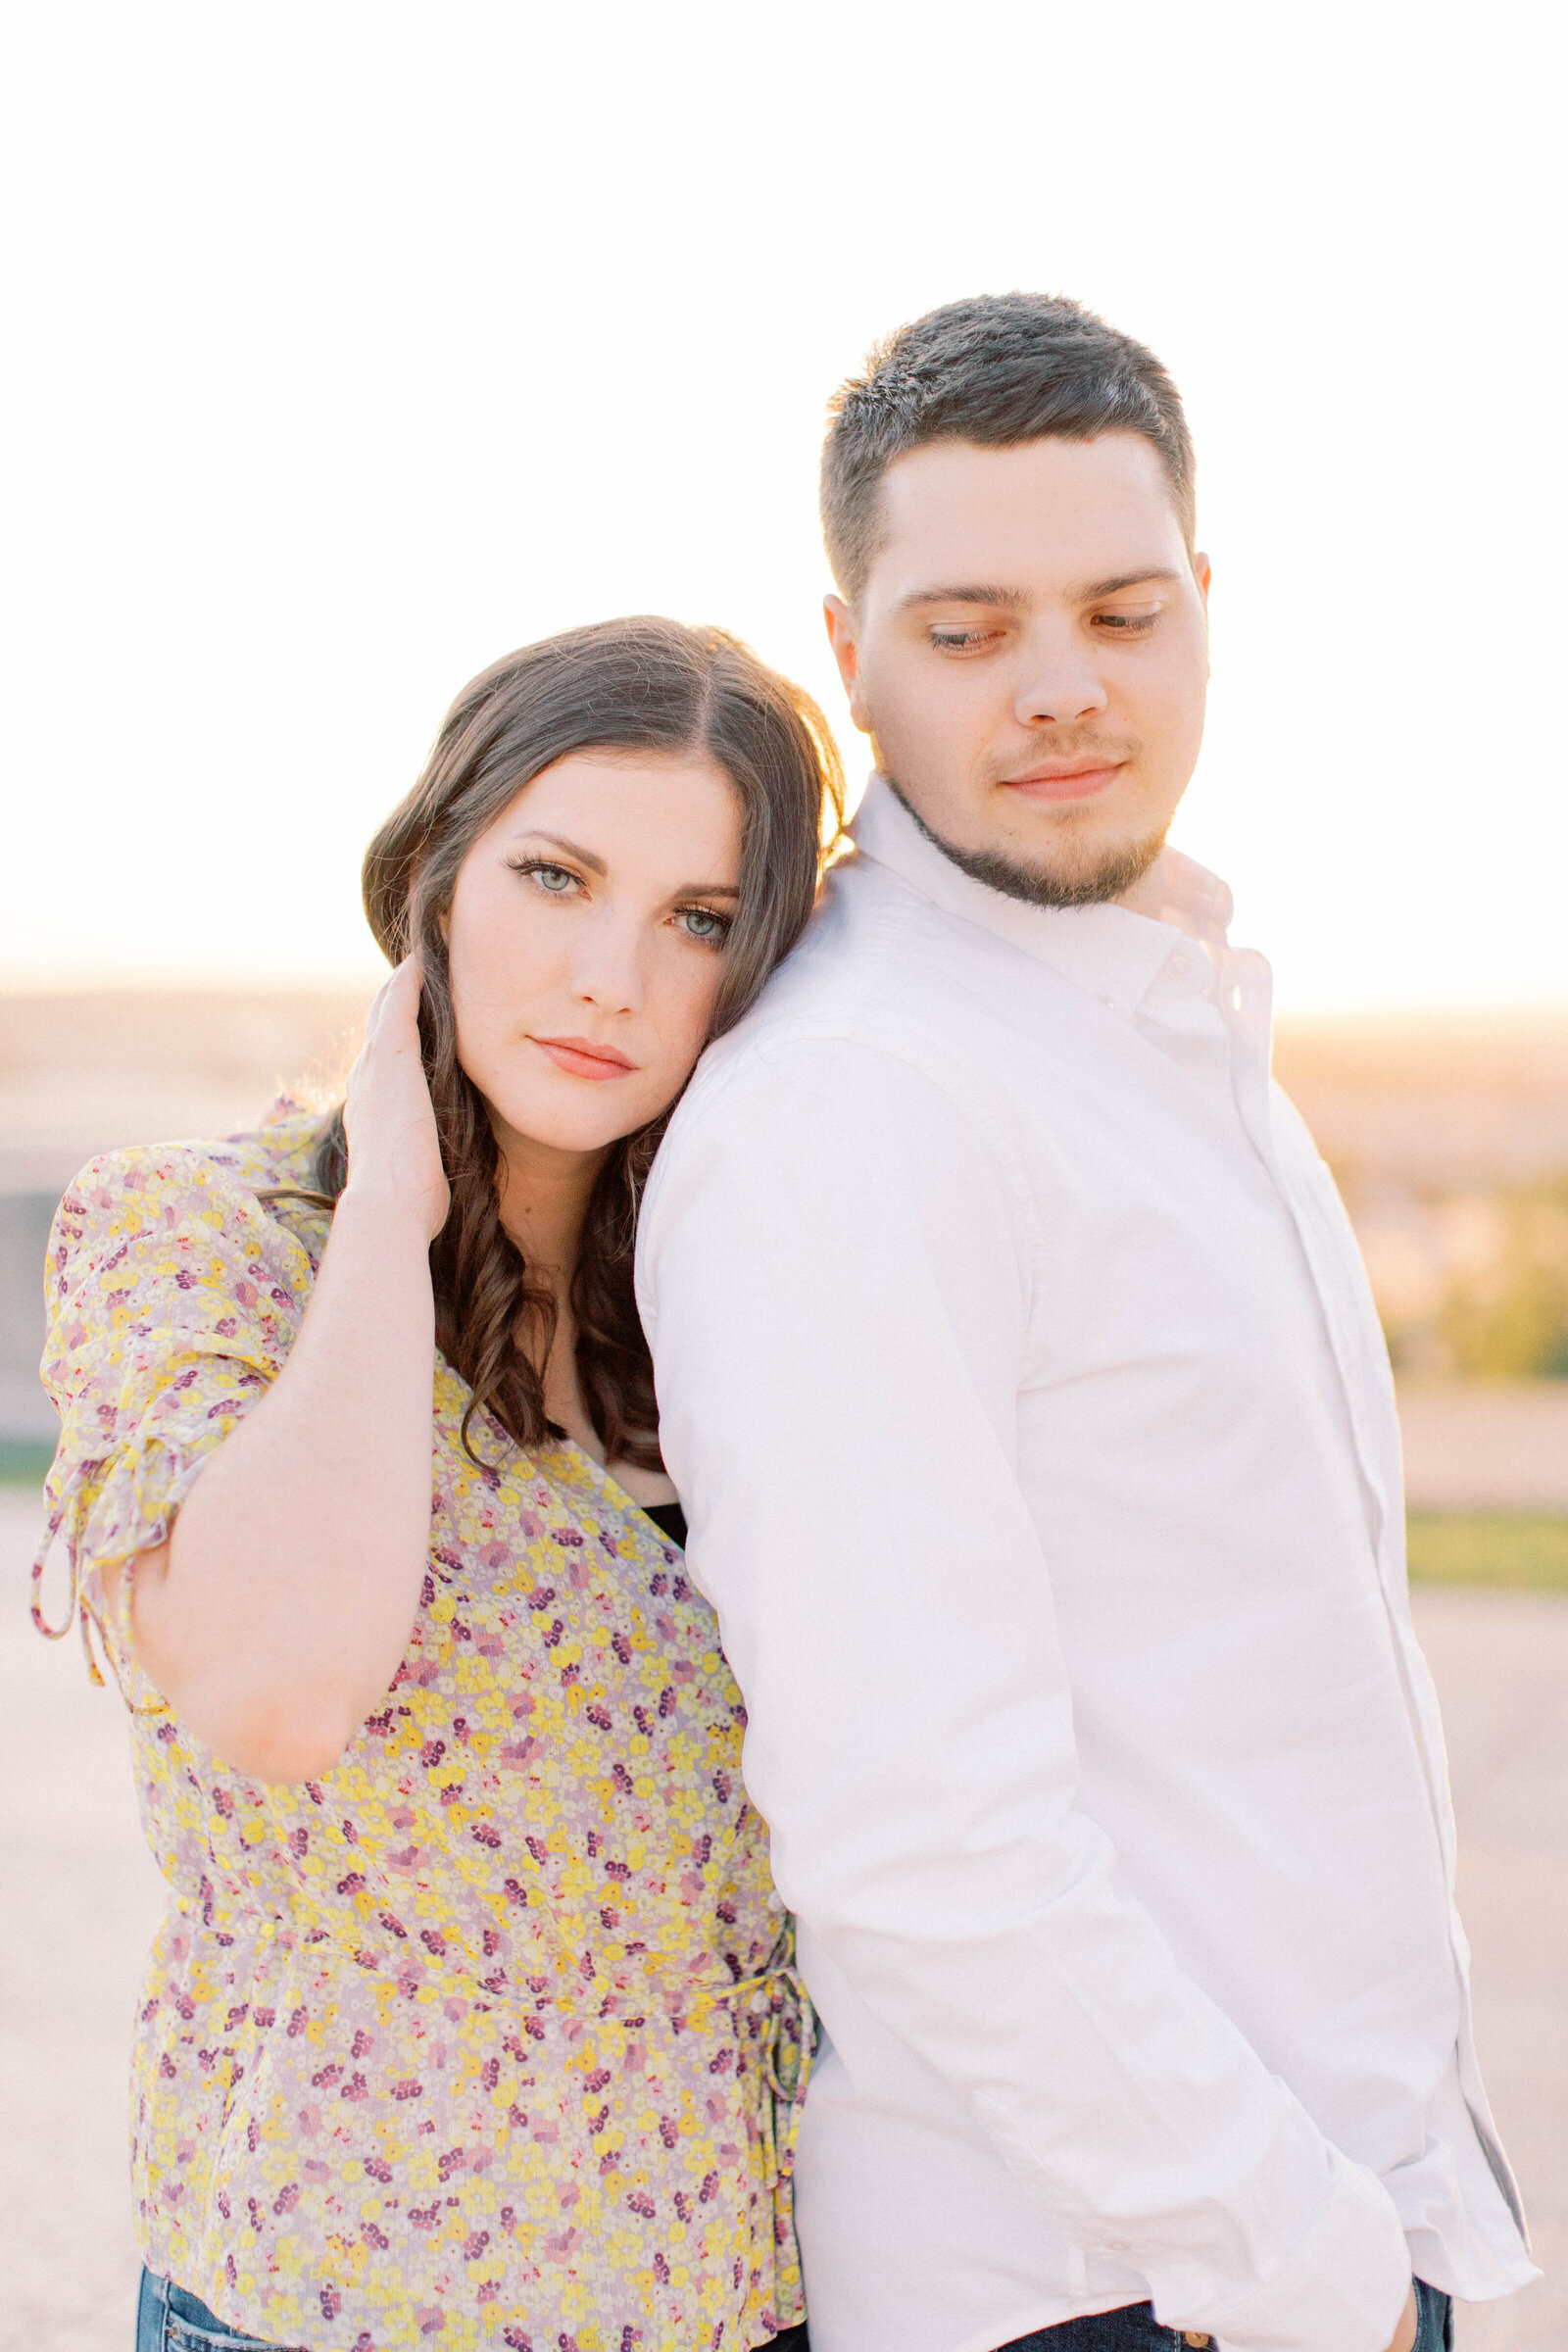 Loose Park and World War One Museum Engagement Session at sunset